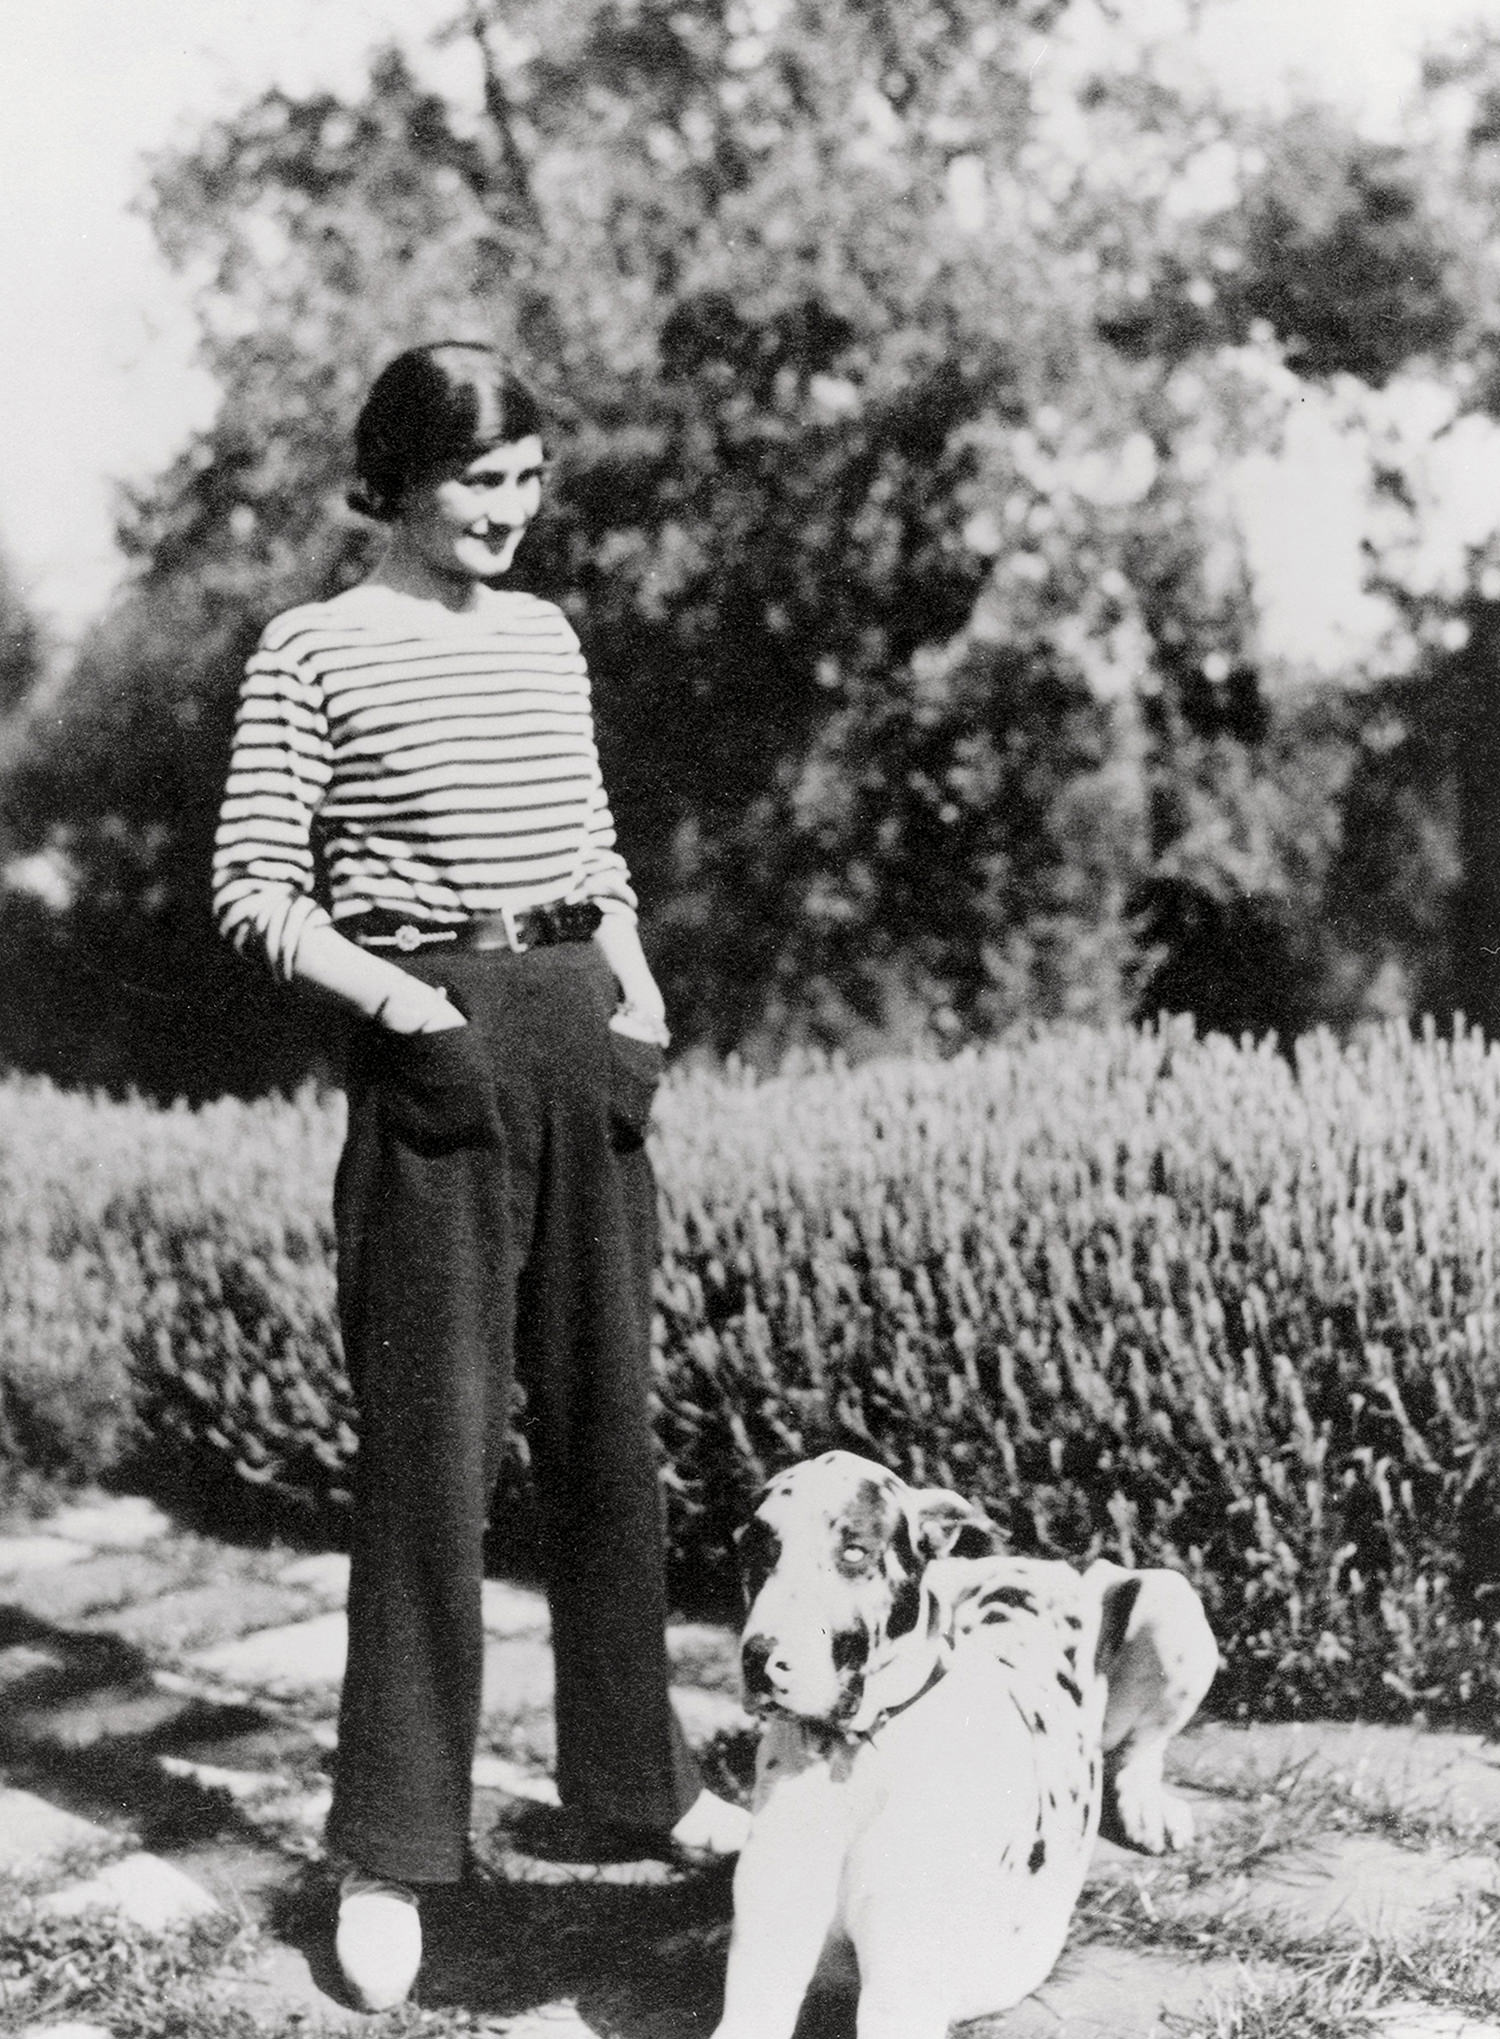 Mademoiselle Chanel at her house La Pausa in the French riviera with her dog Gigot